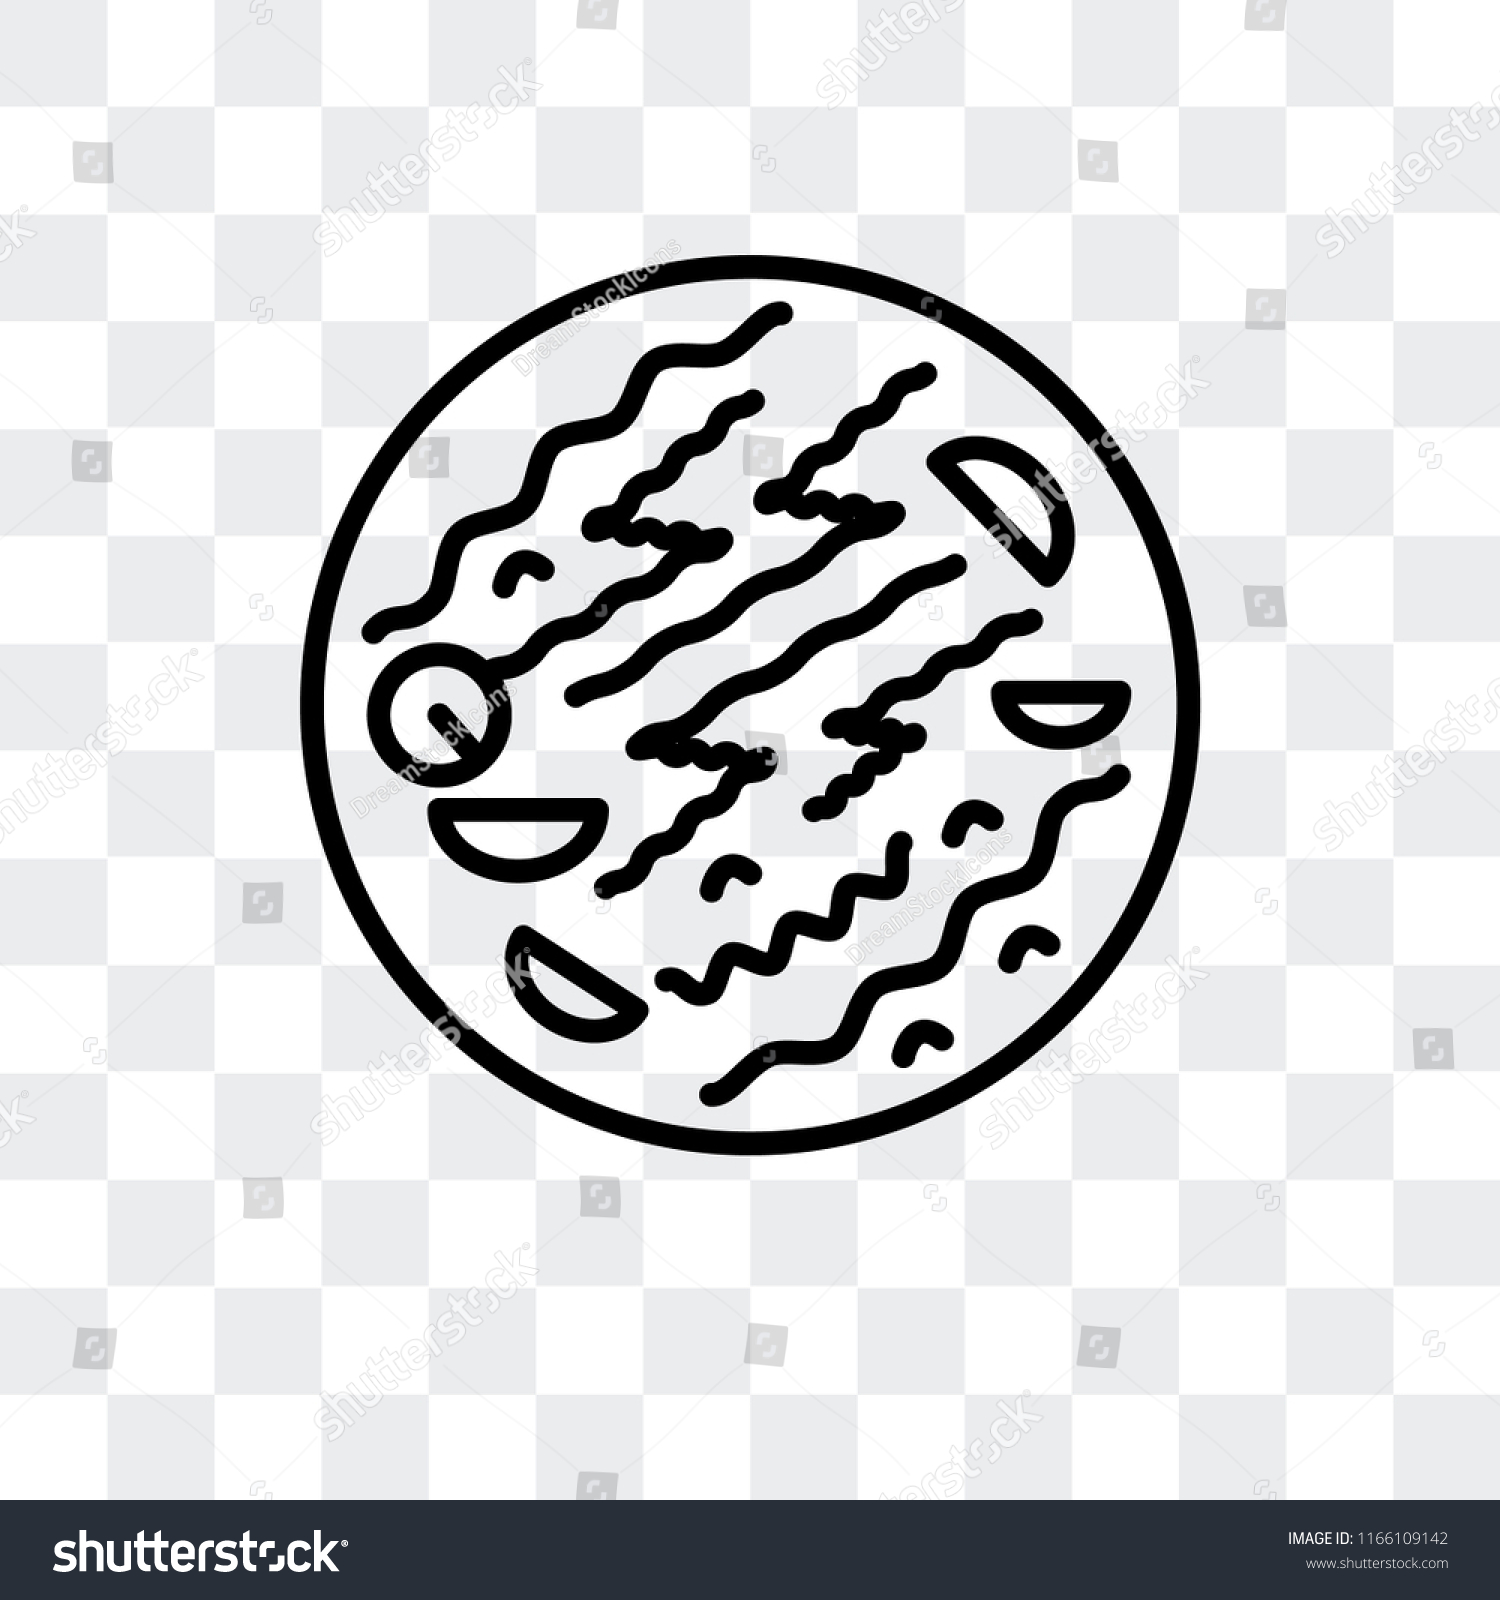 SVG of Chow mein vector icon isolated on transparent background, Chow mein logo concept svg